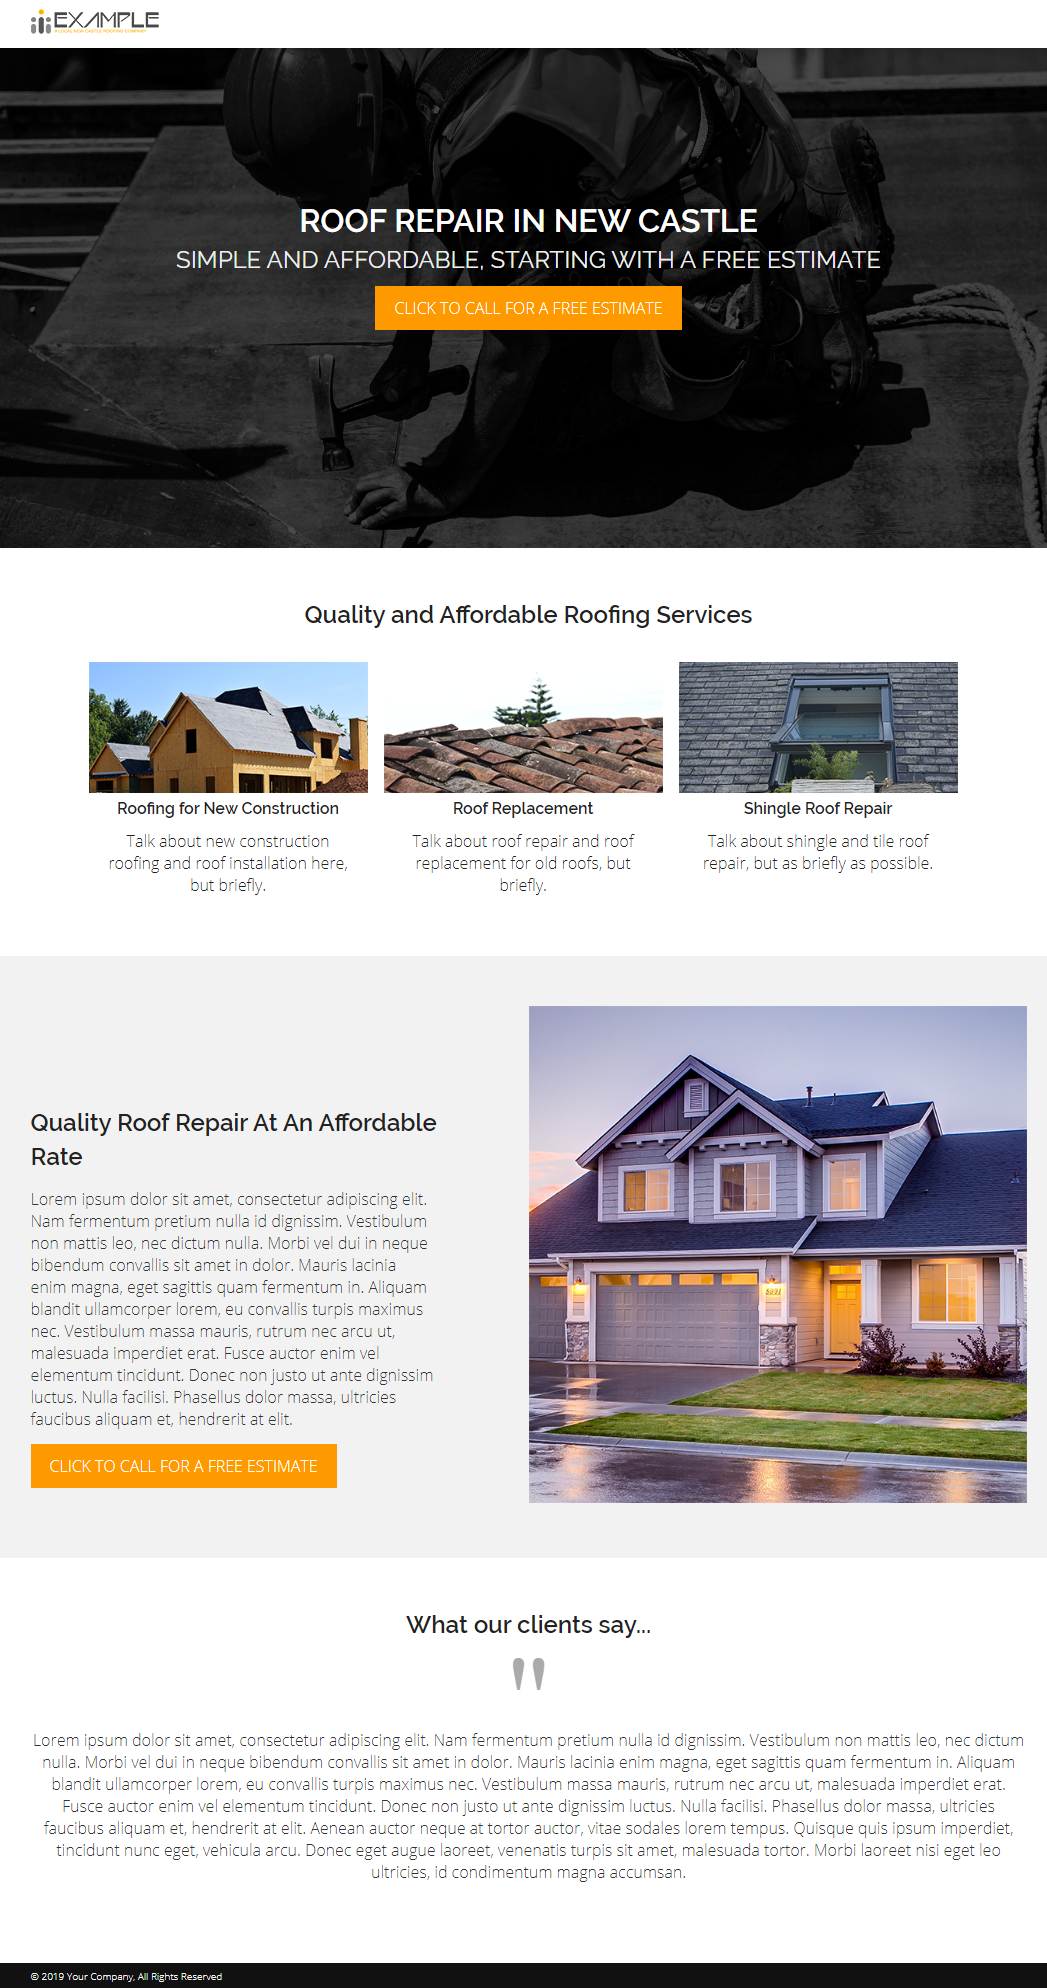 final landing page design for our New Castle roofing company